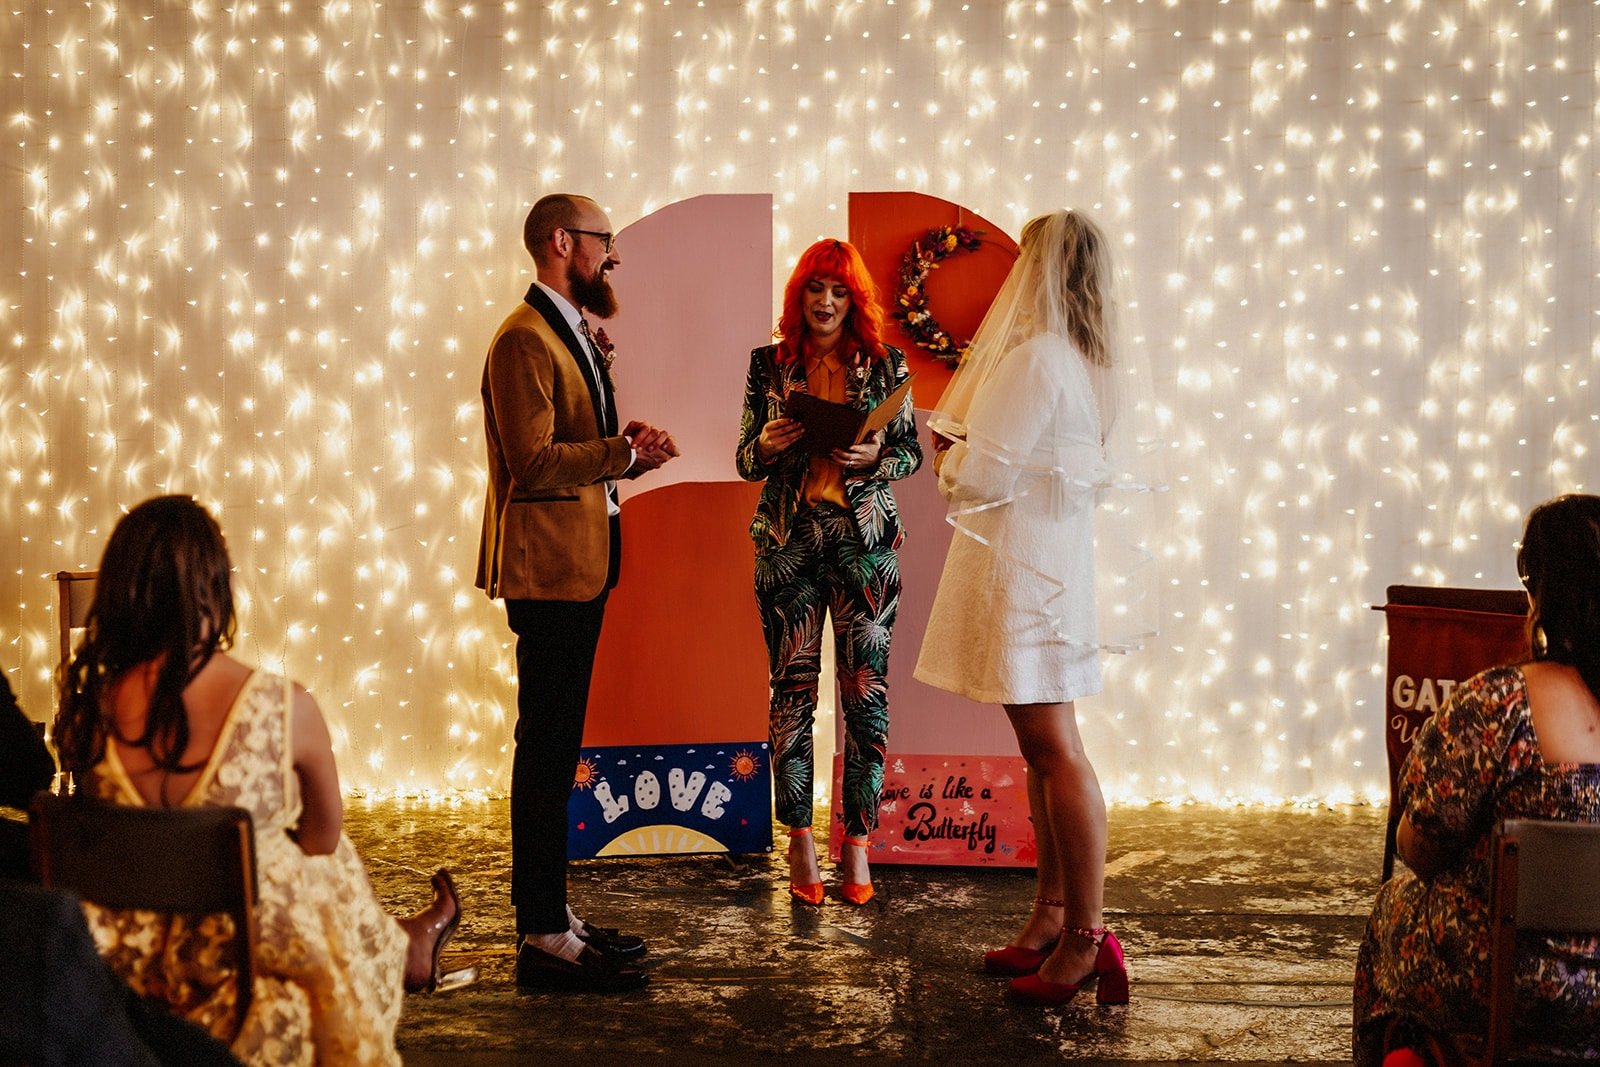  Photo by: Andrew Heeley Photography  Image shows humanist celebrant in front of a wall of fairy lights and a bright ceremony backdrop in orange and pink with LOVE IS LIKE A BUTTERFLY printed on.  The wedding celebrant is wearing a bright palm print 